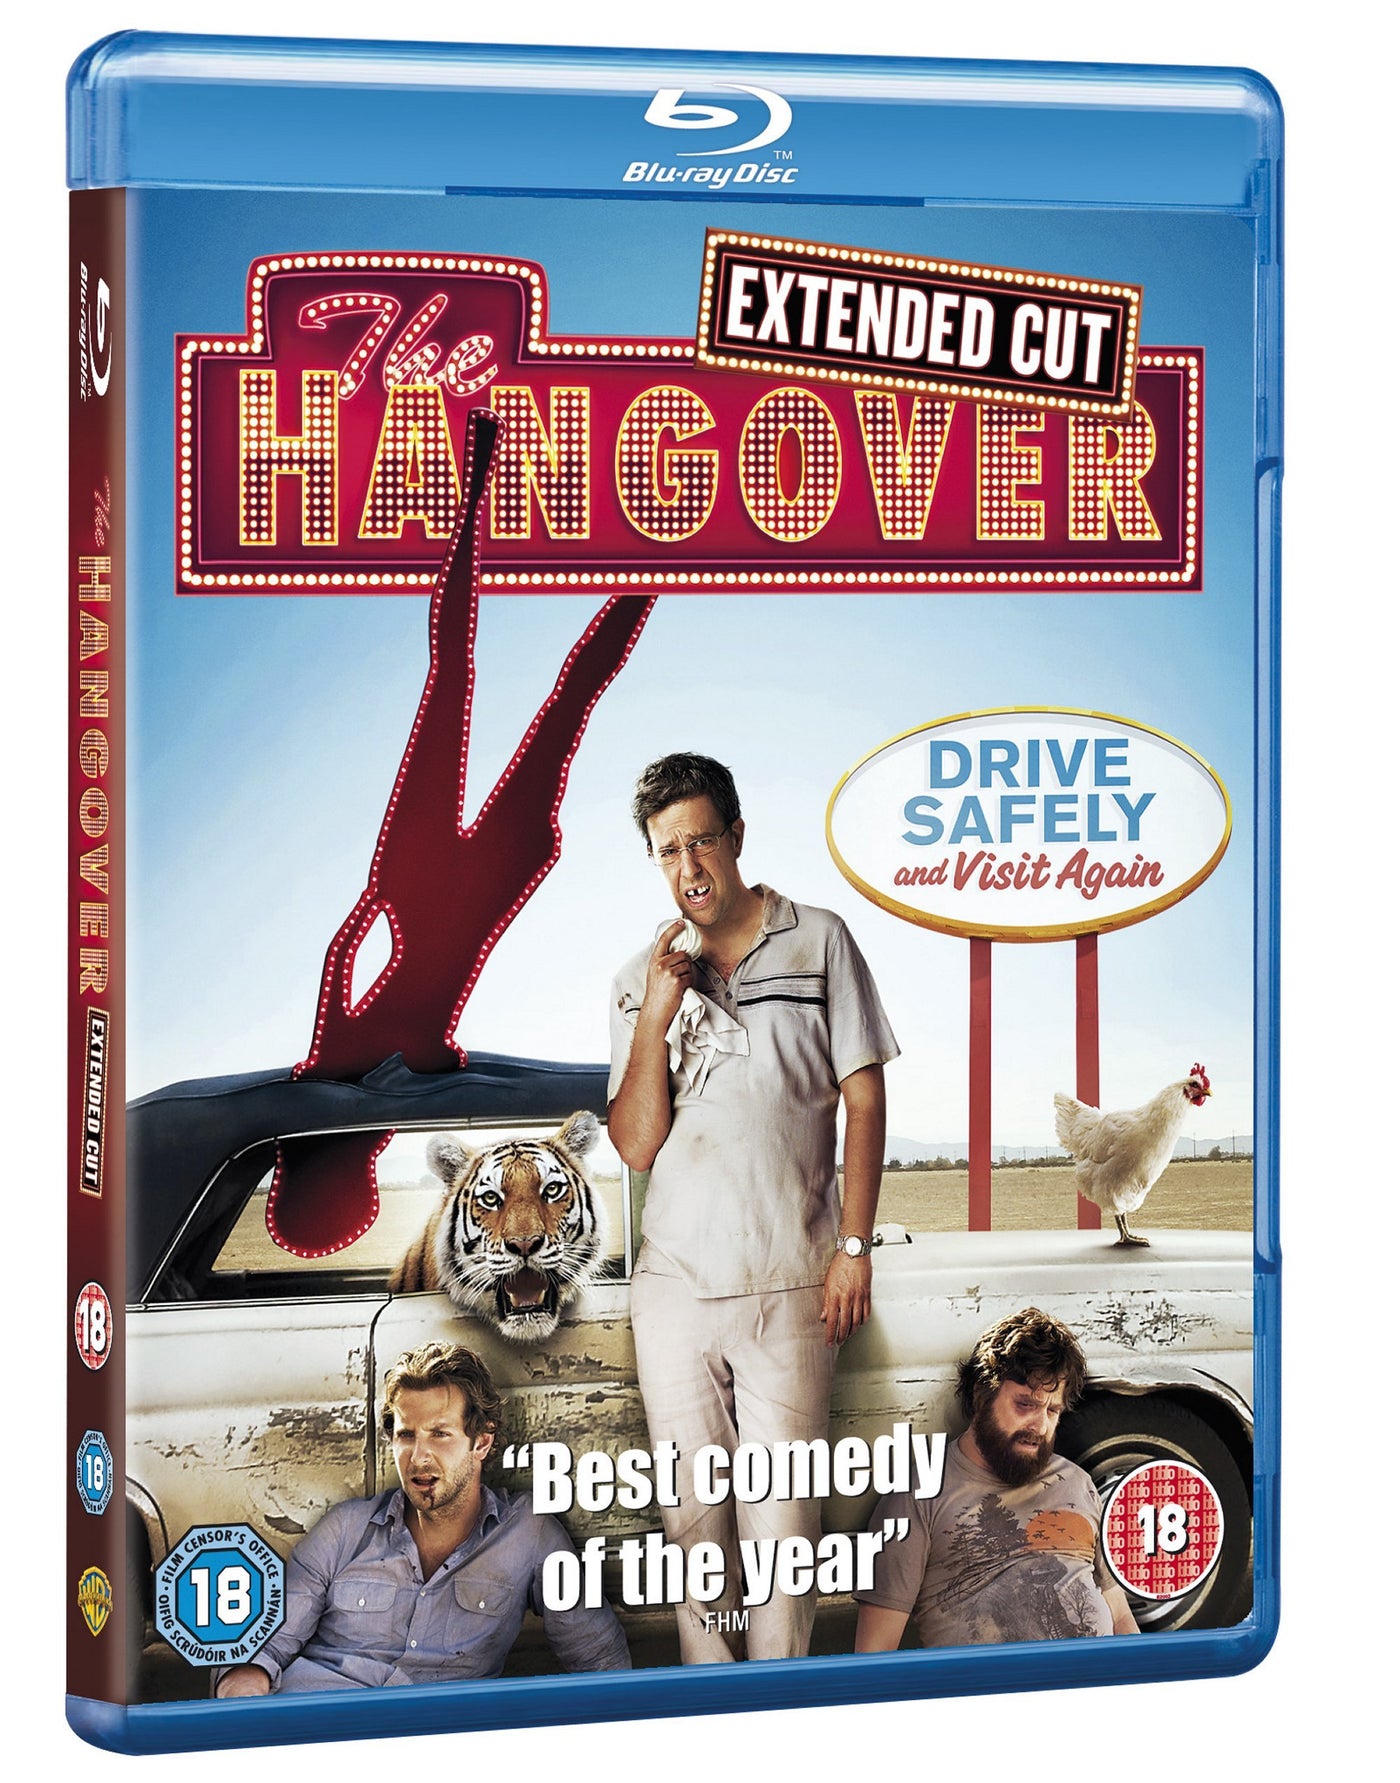 The Hangover (Extended Cut) (2009) (Blu-ray)